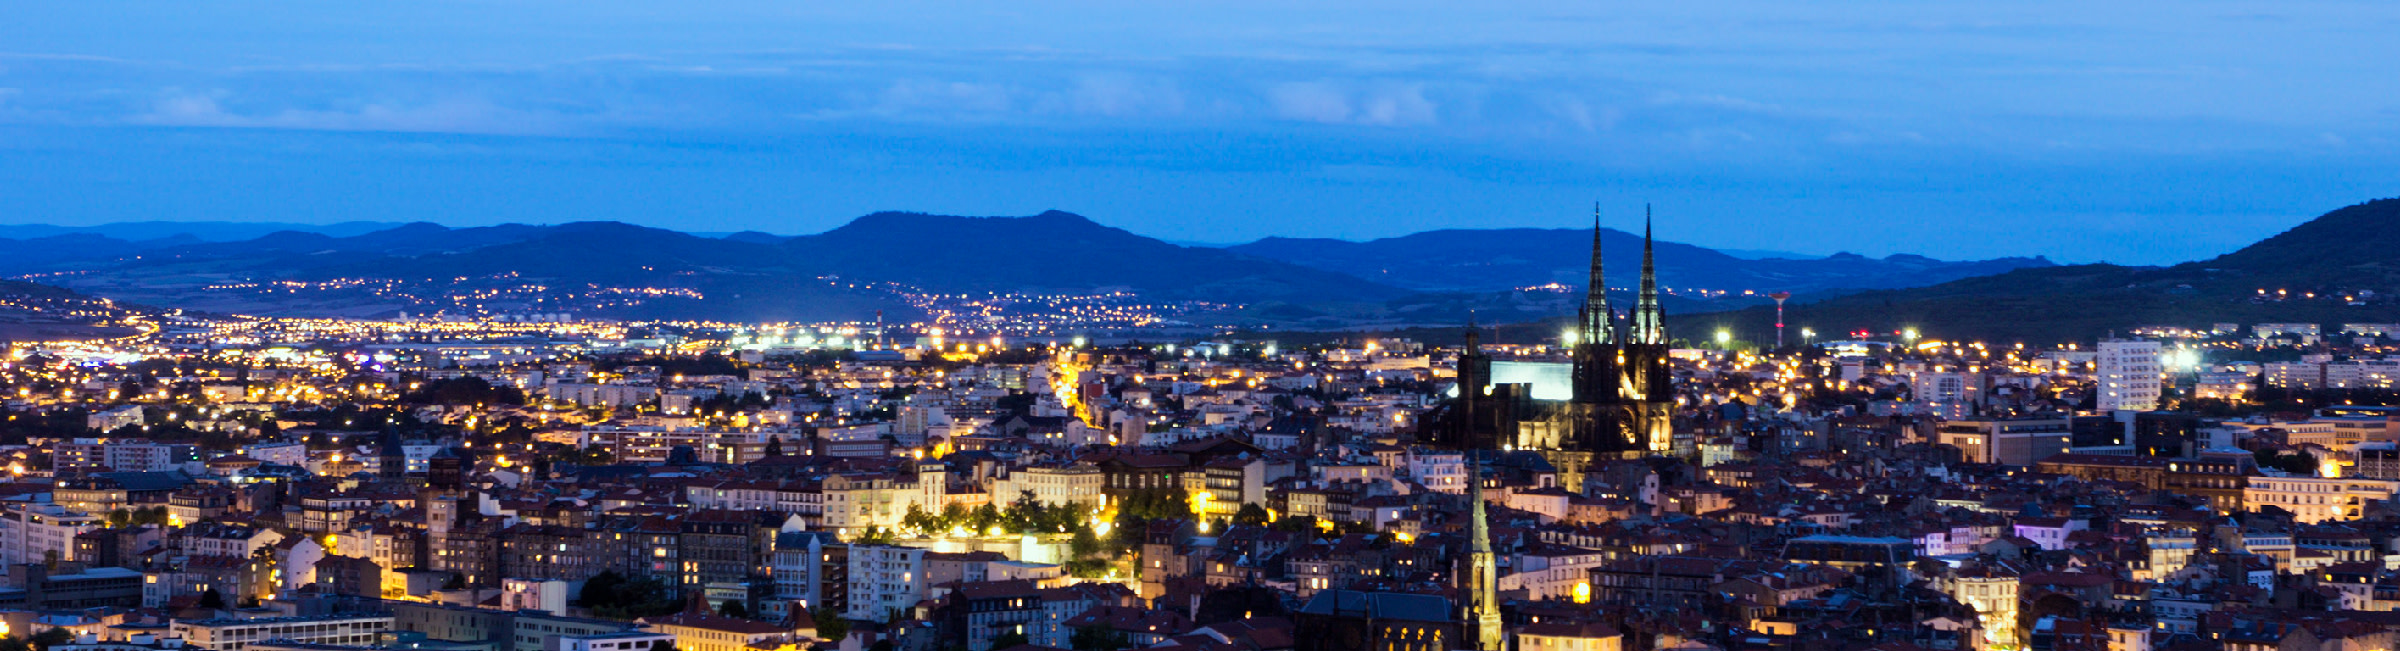 An ariel view, at night, of the cosy French town of Clermont Ferrand. Old buildings and yellow light lie before distant hills.